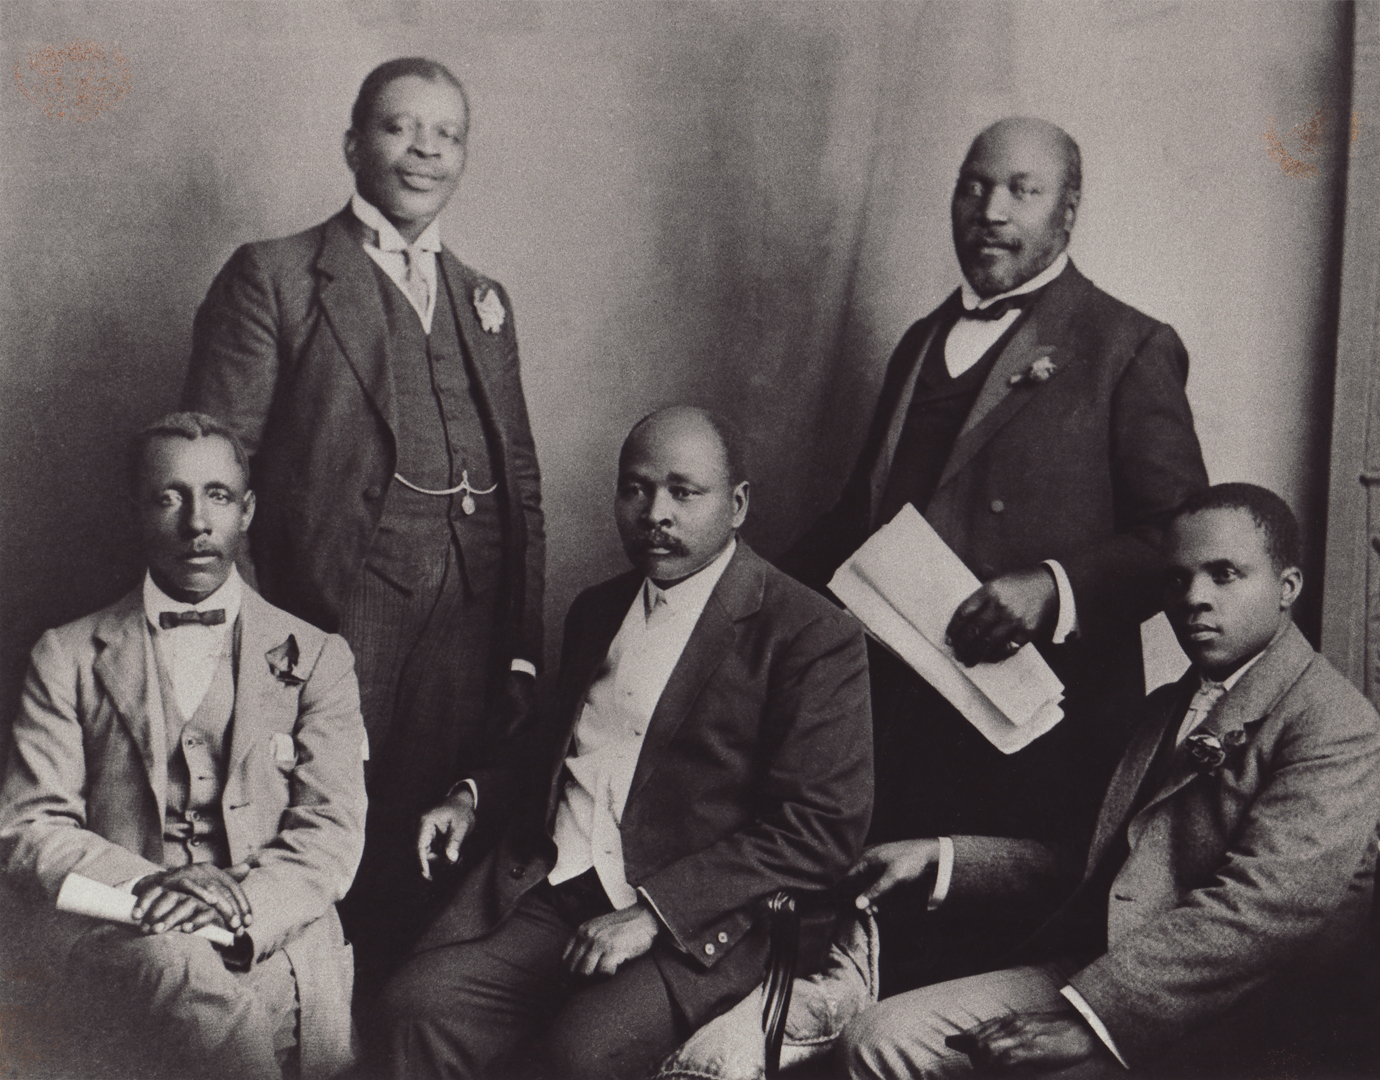 <p>In response to the Union’s trend towards exclusionary legislation, black intelligentsia found the South African Native National Congress — the forerunner of the ANC. The following year, the SANNC will vigorously oppose the passing of the Natives Land Act, which will seek to dispossess black South Africans of 90% of their land.</p>